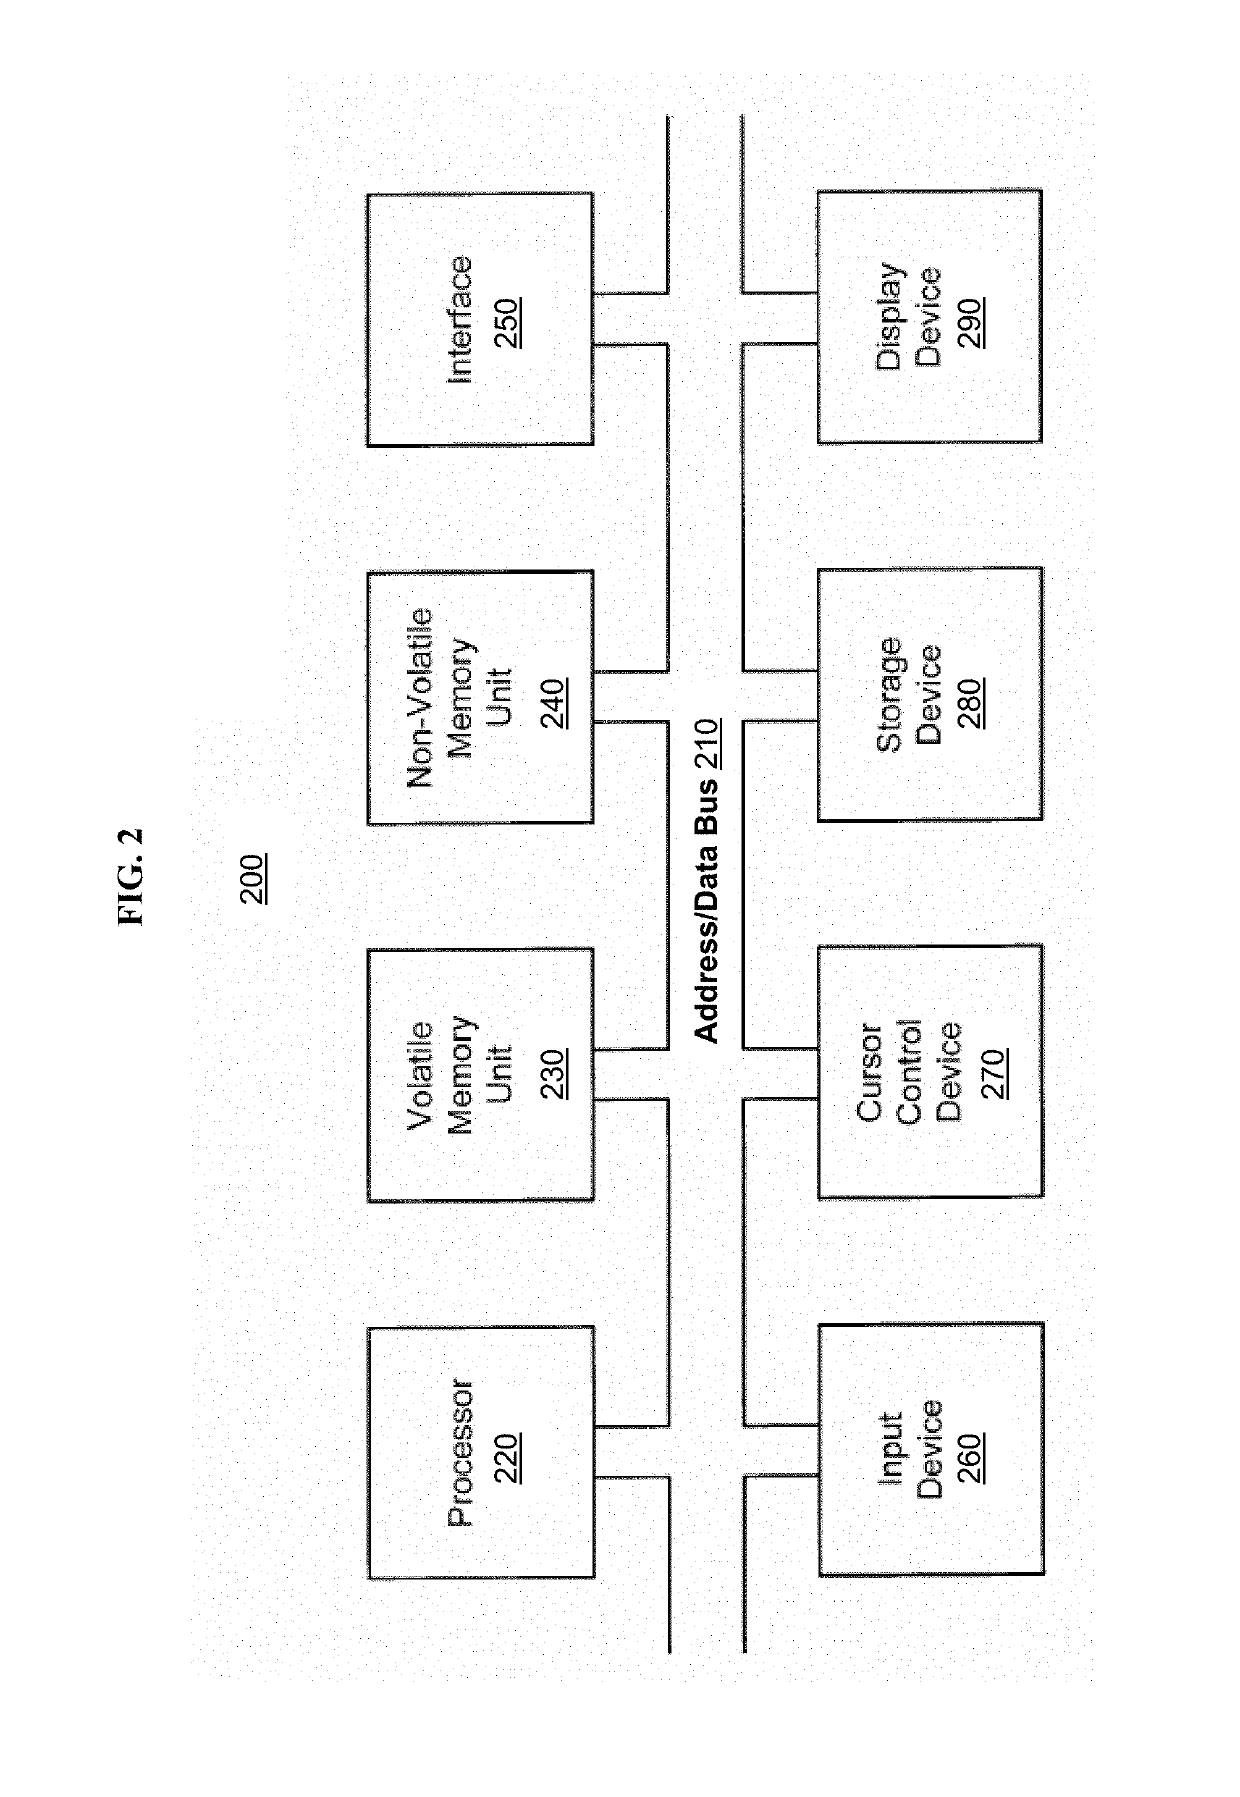 Methods for online estimation of battery capacity and state of health